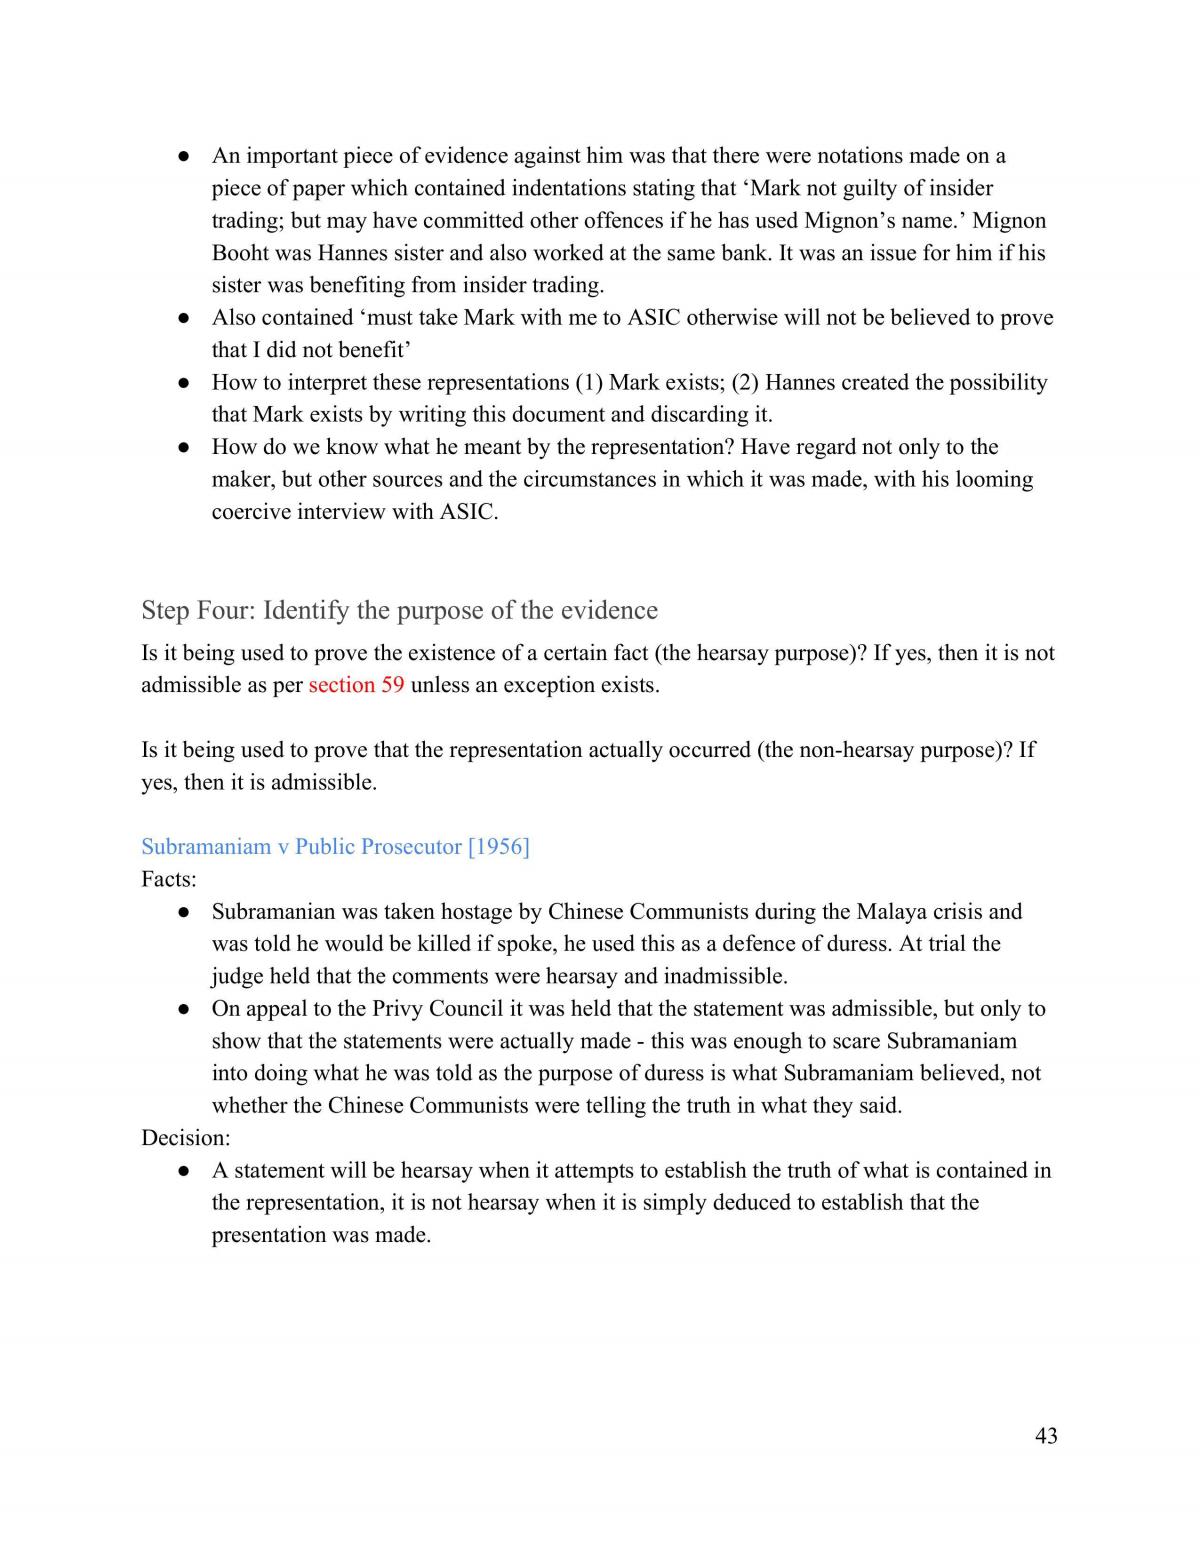 Full Evidence Notes - Page 43